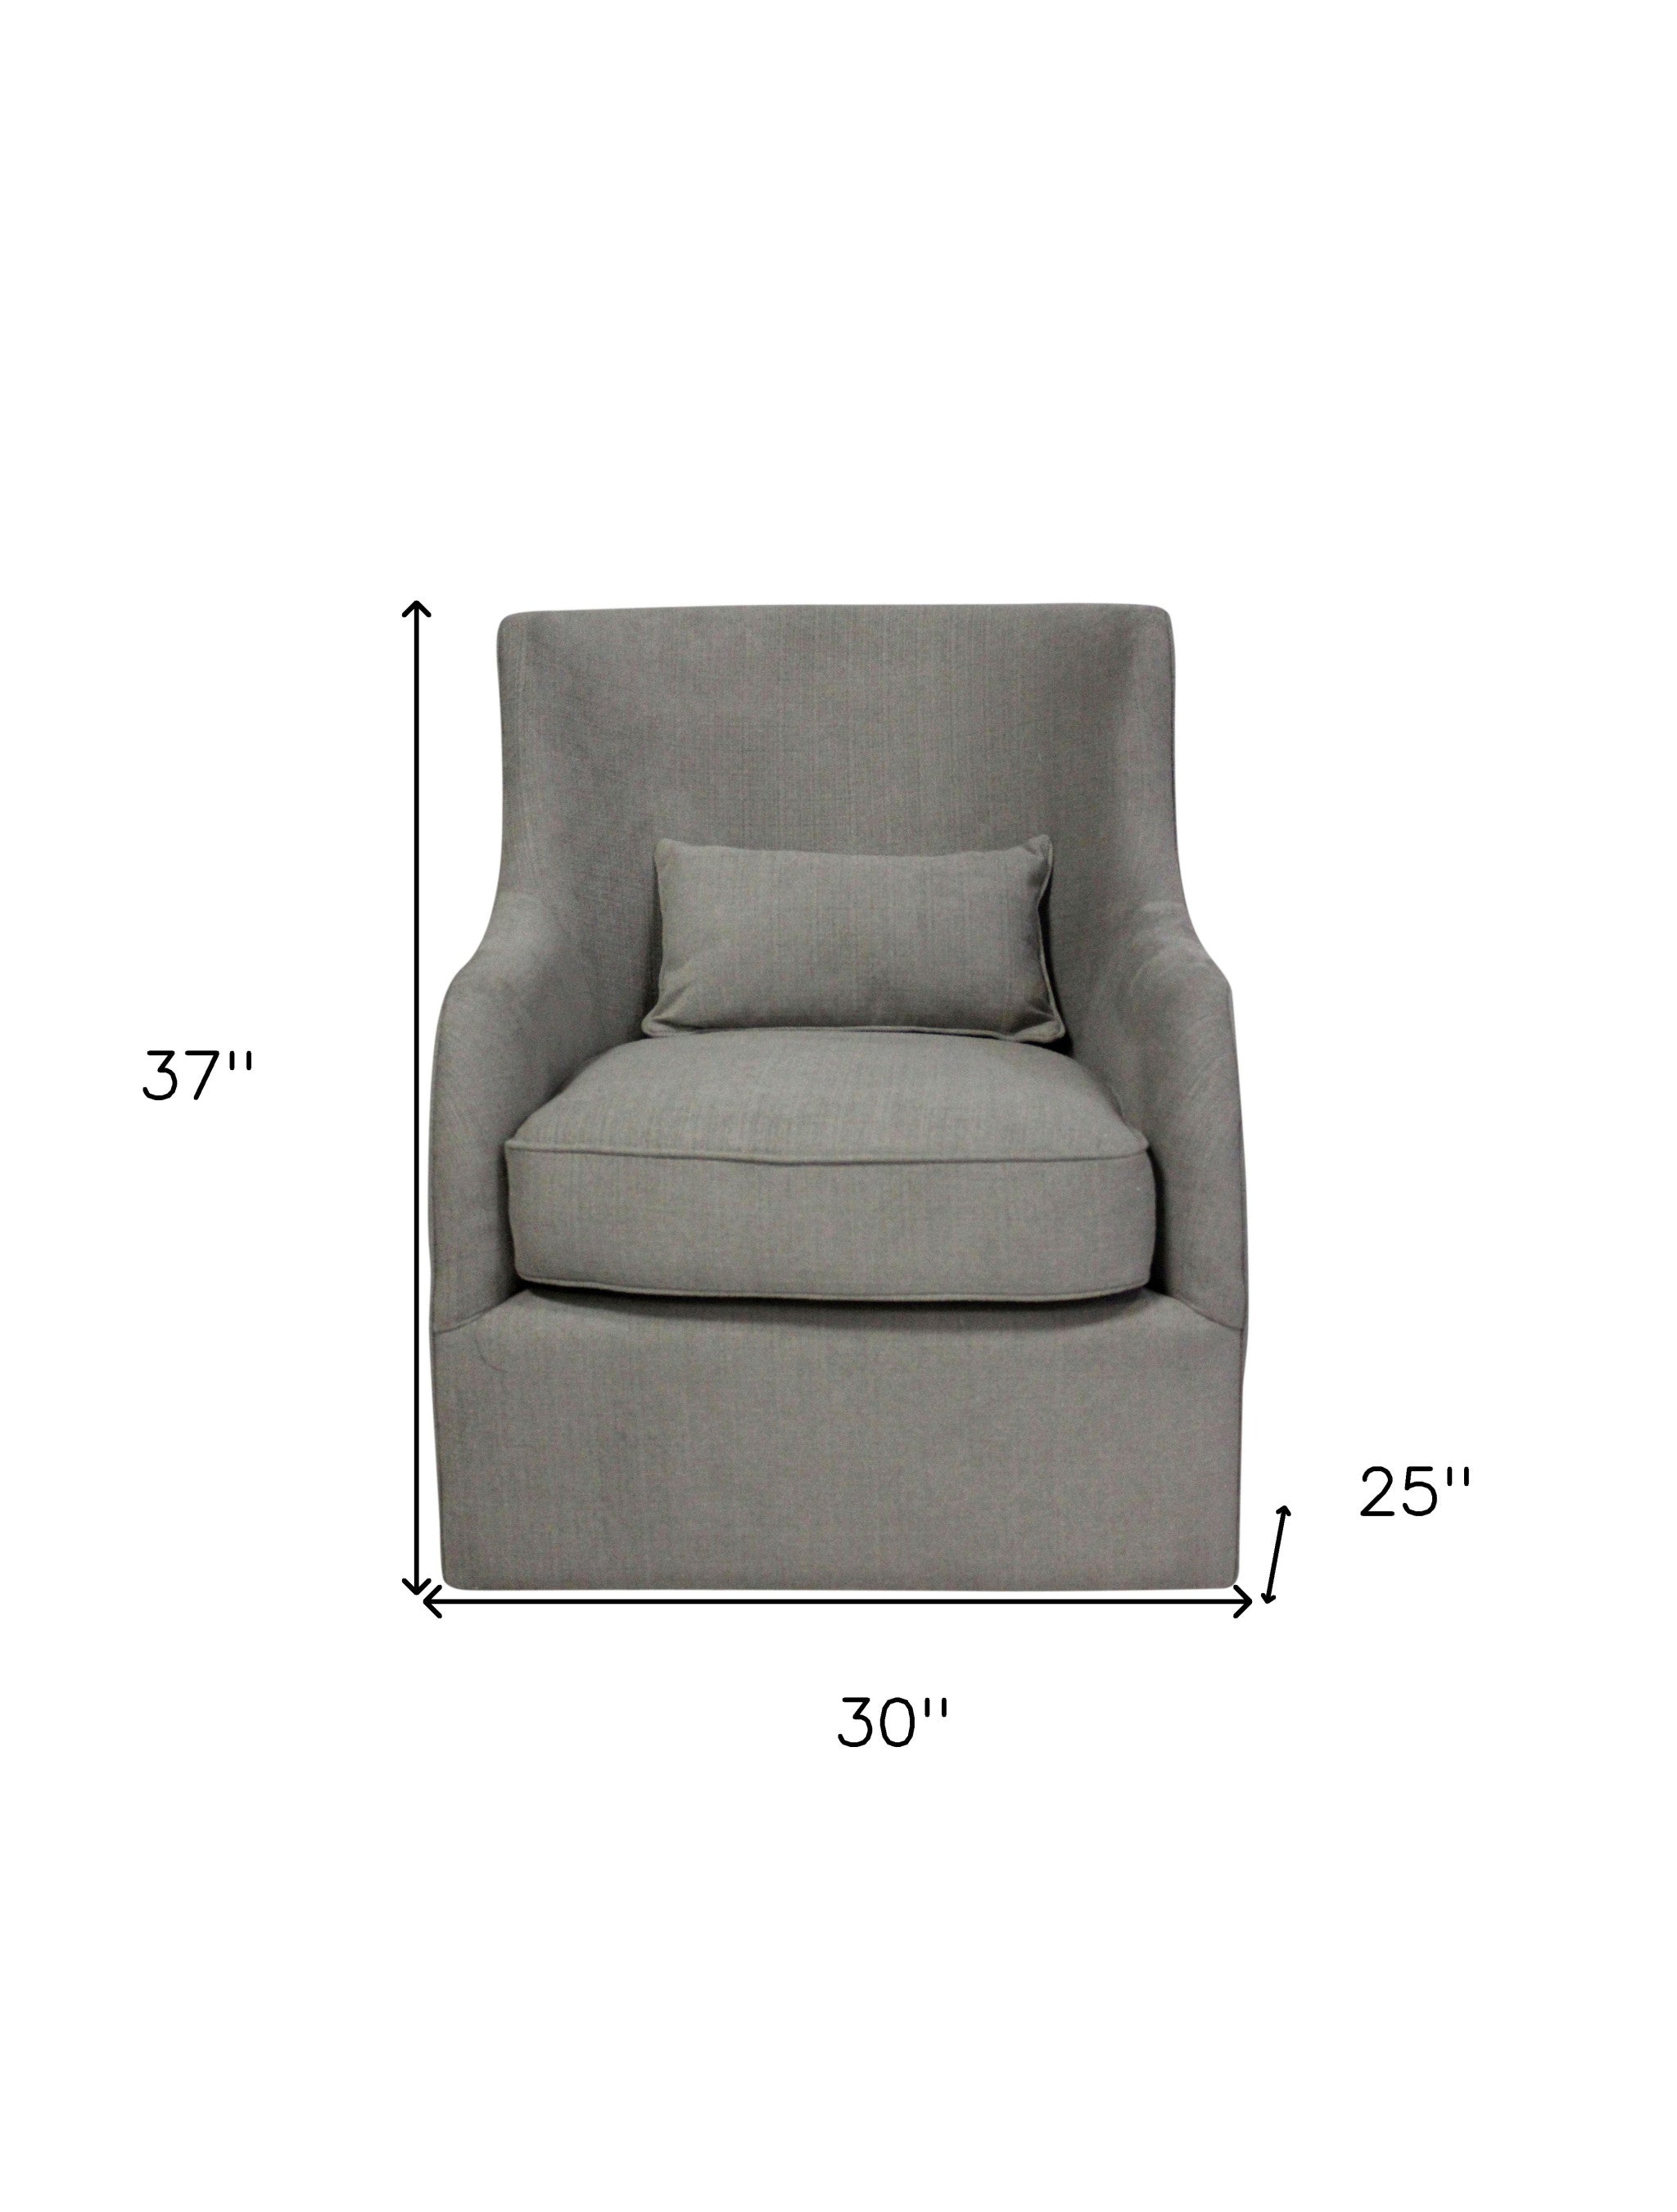 30" Gray Polyester Blend Solid Color Swivel Arm Chair